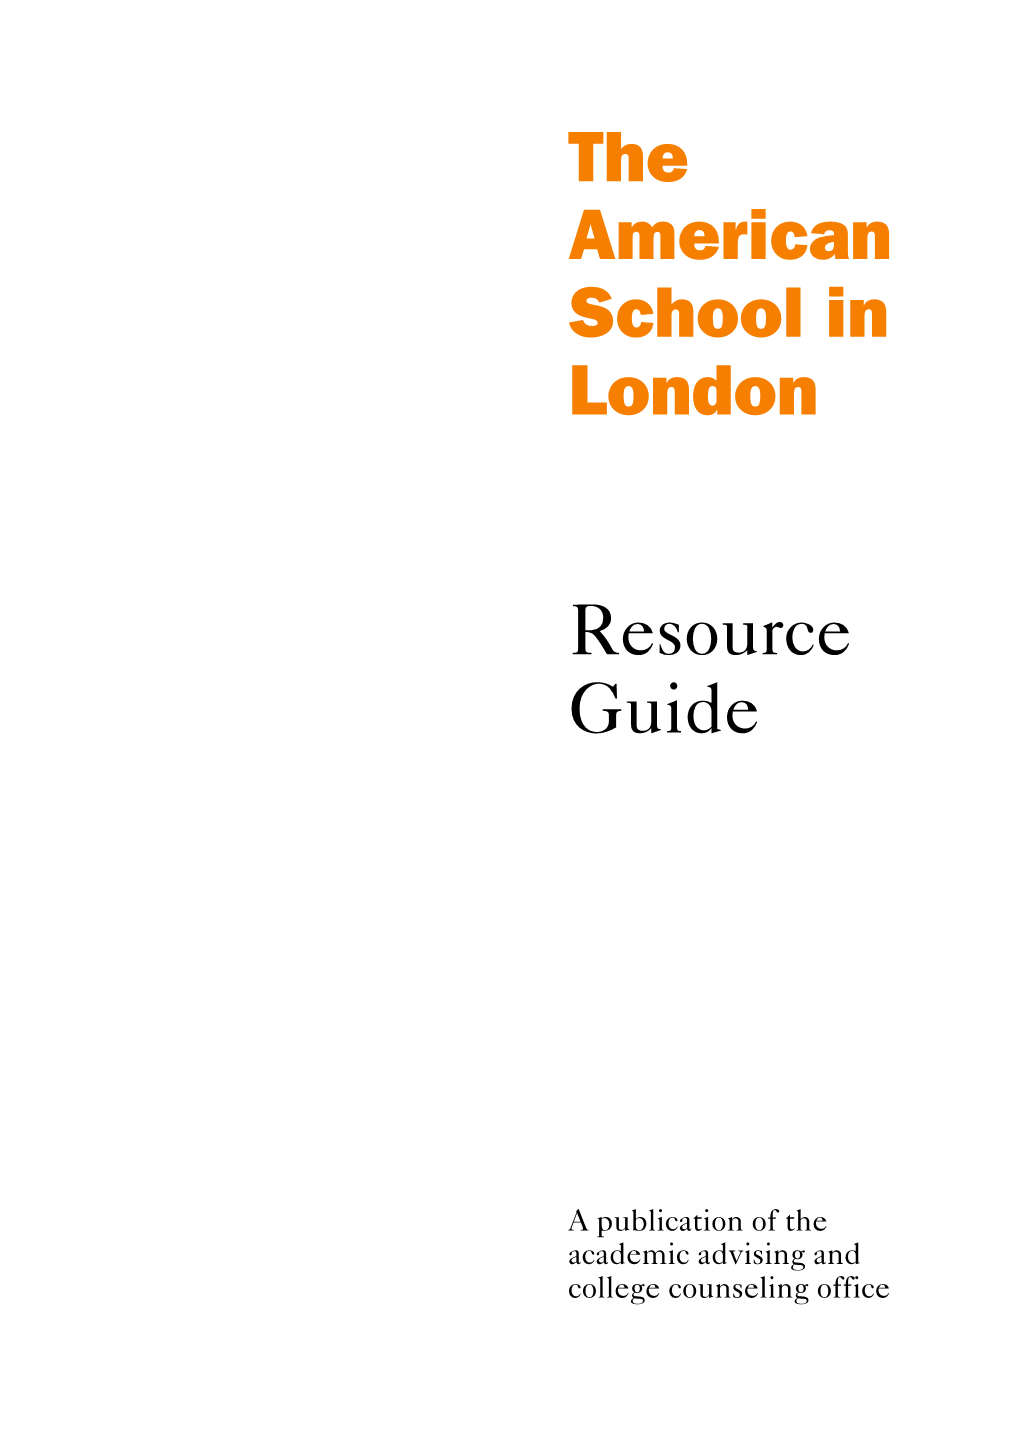 The American School in London Resource Guide